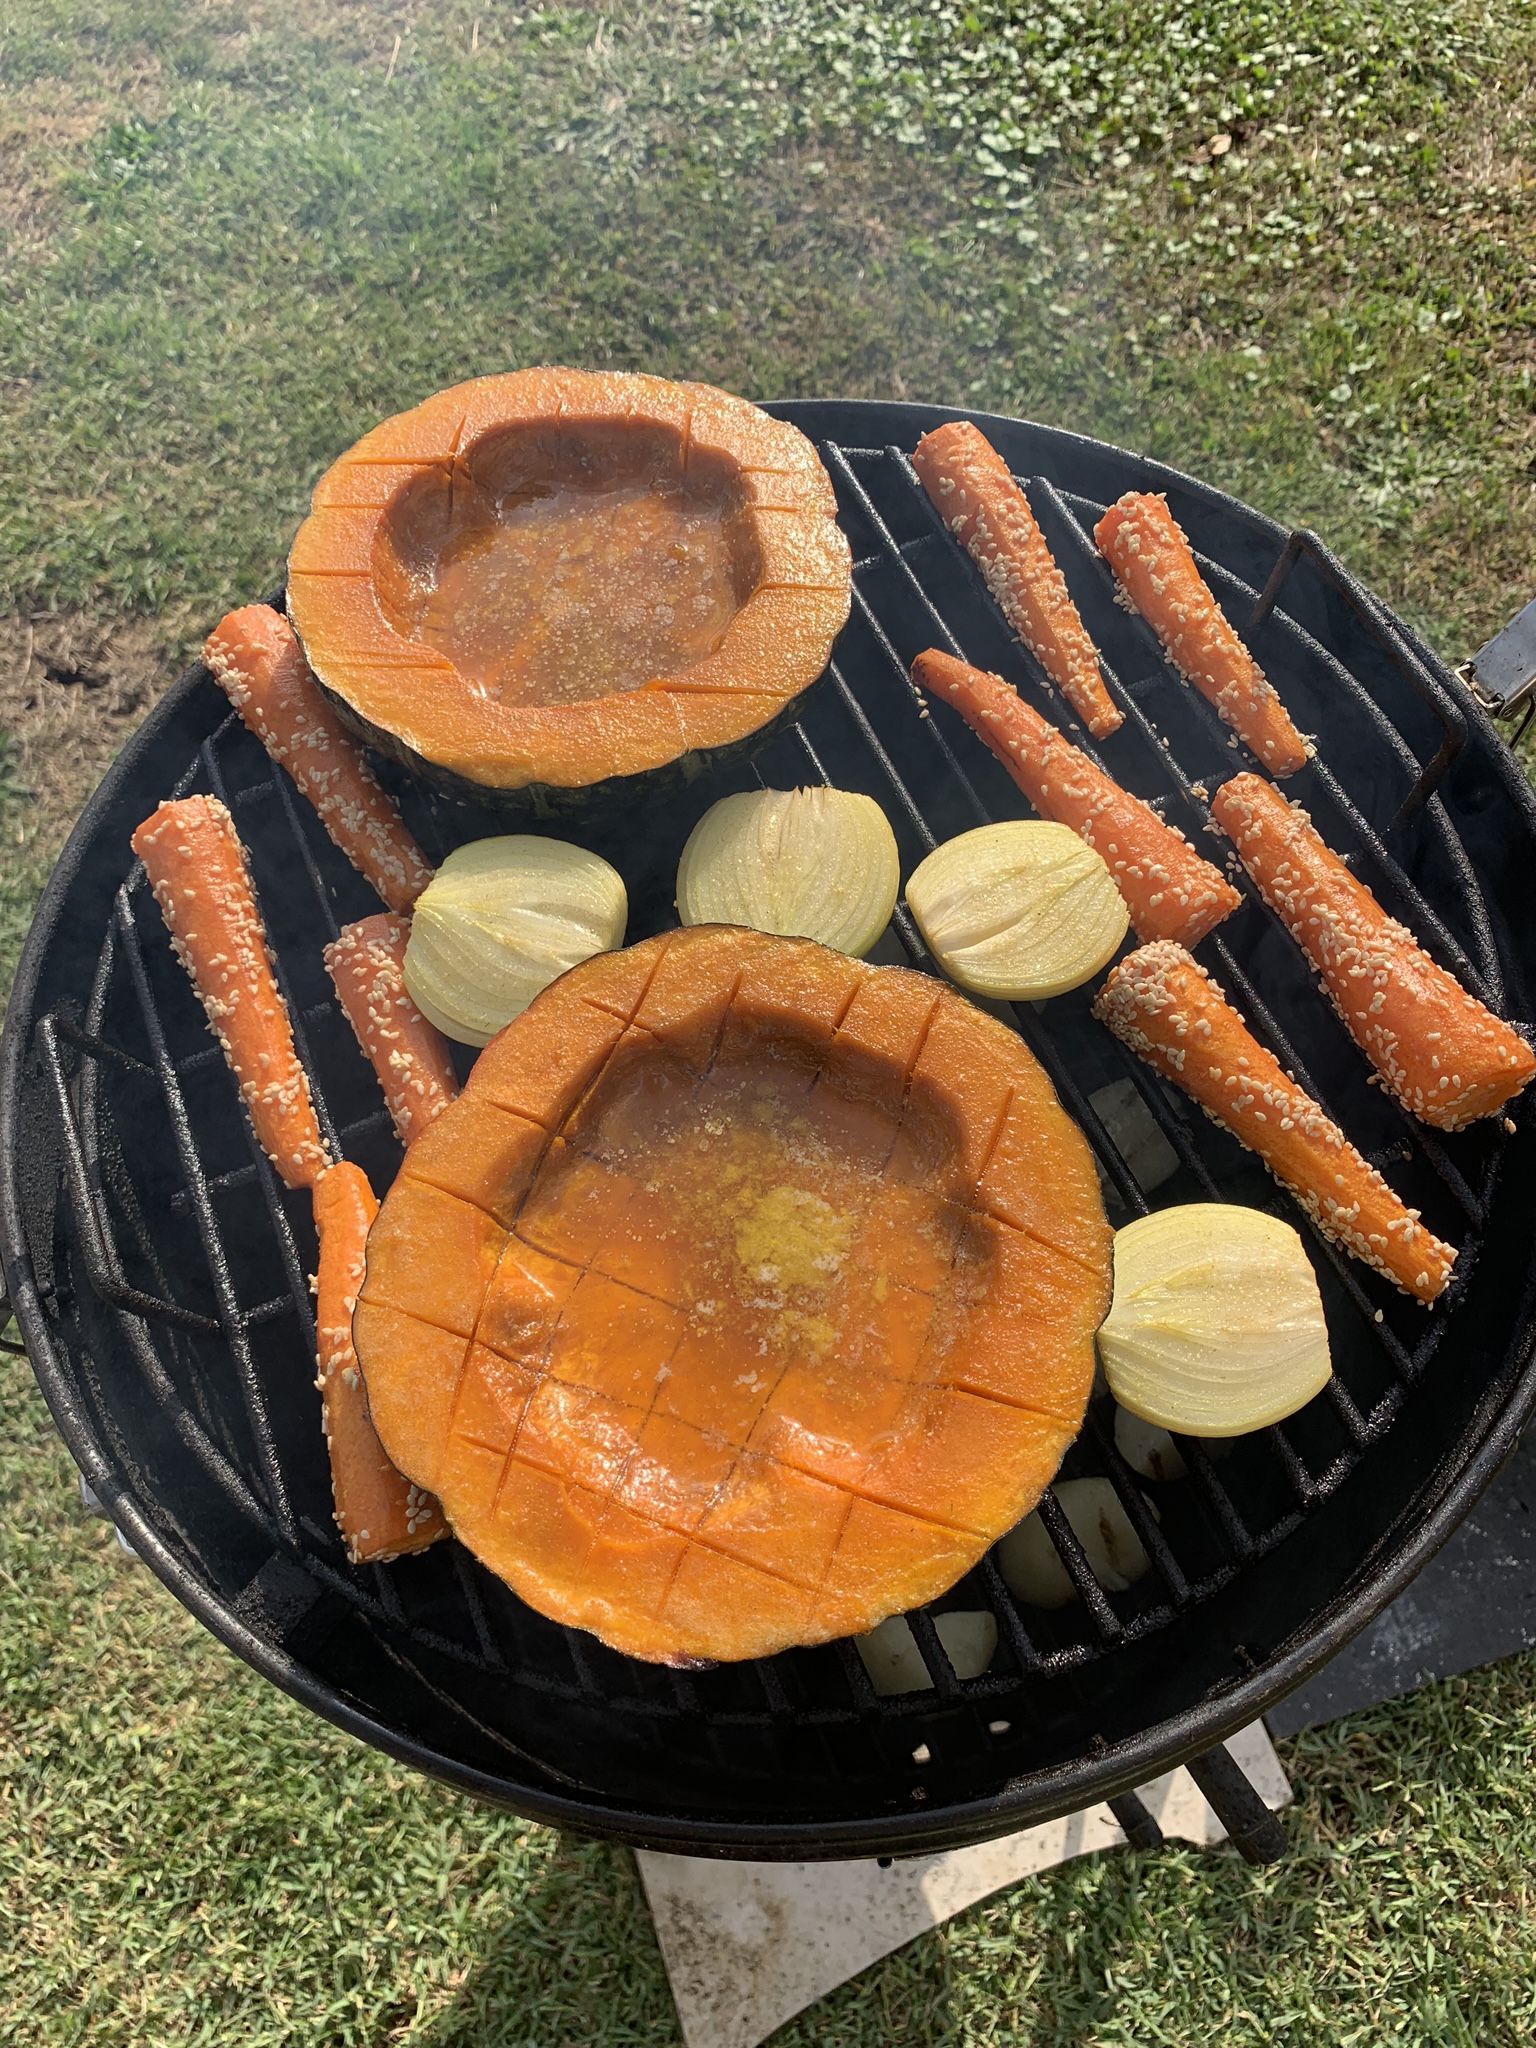 The smoker with pumpkins, carrots, and onions.  Pumpkins are a rich orange.  All the butter has melted and flowed into the bowl.